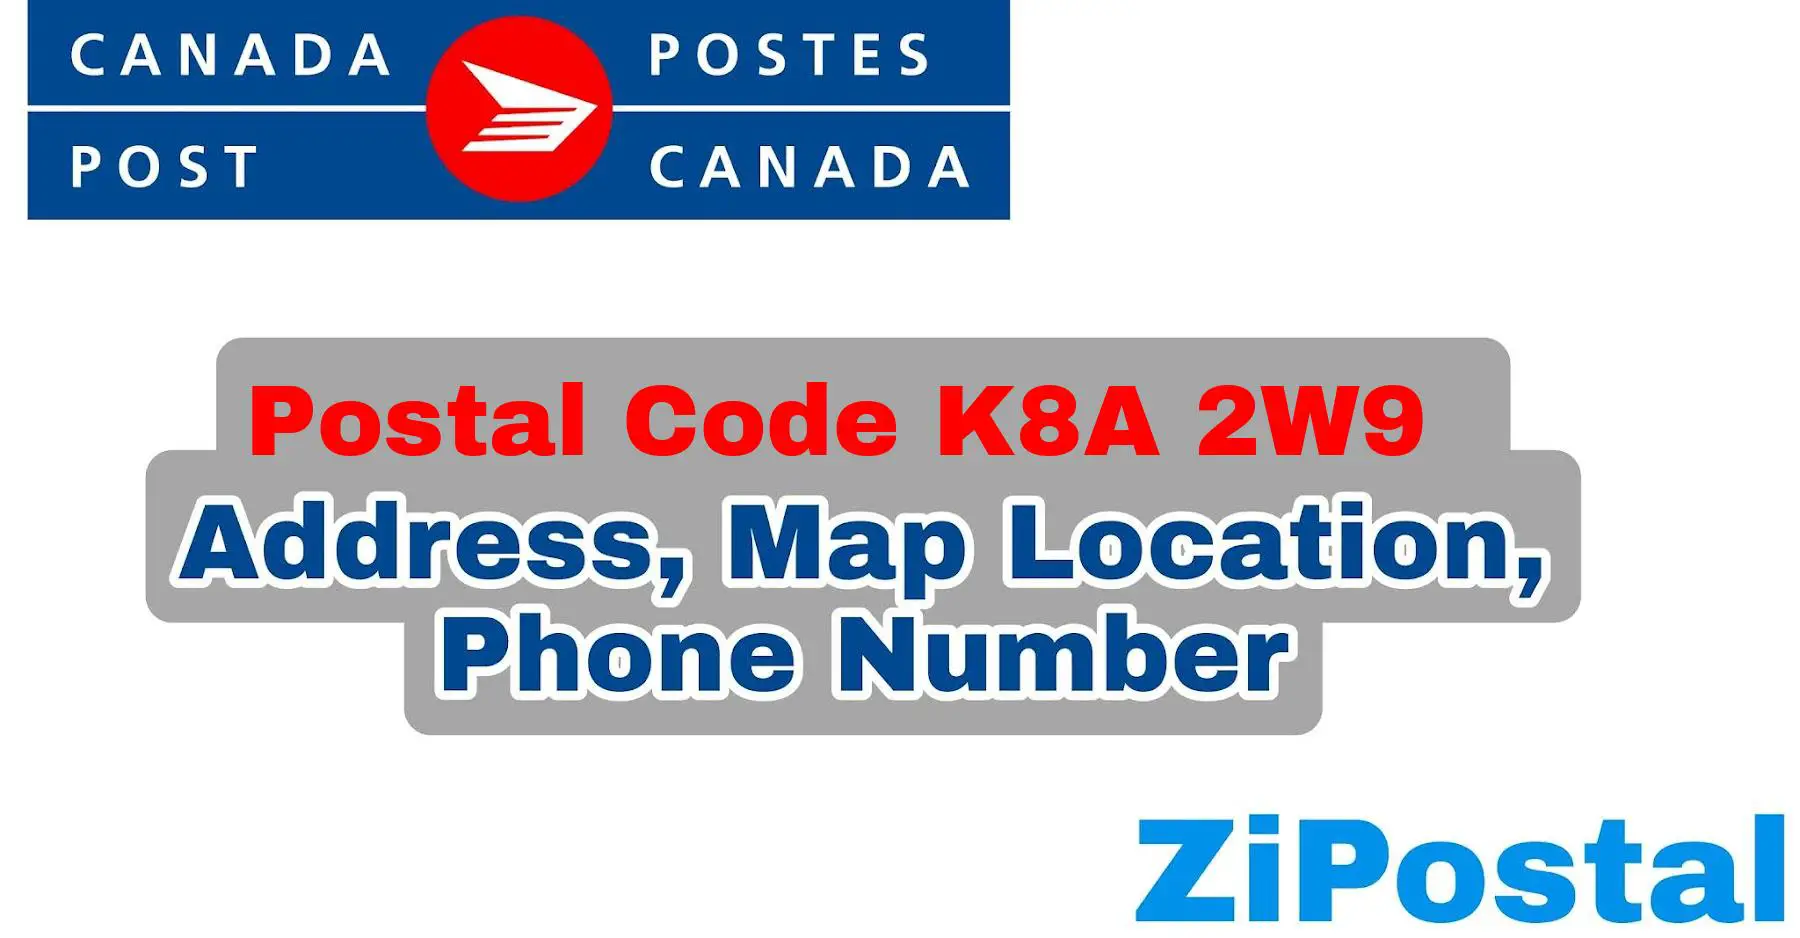 Postal Code K8A 2W9 Address Map Location and Phone Number